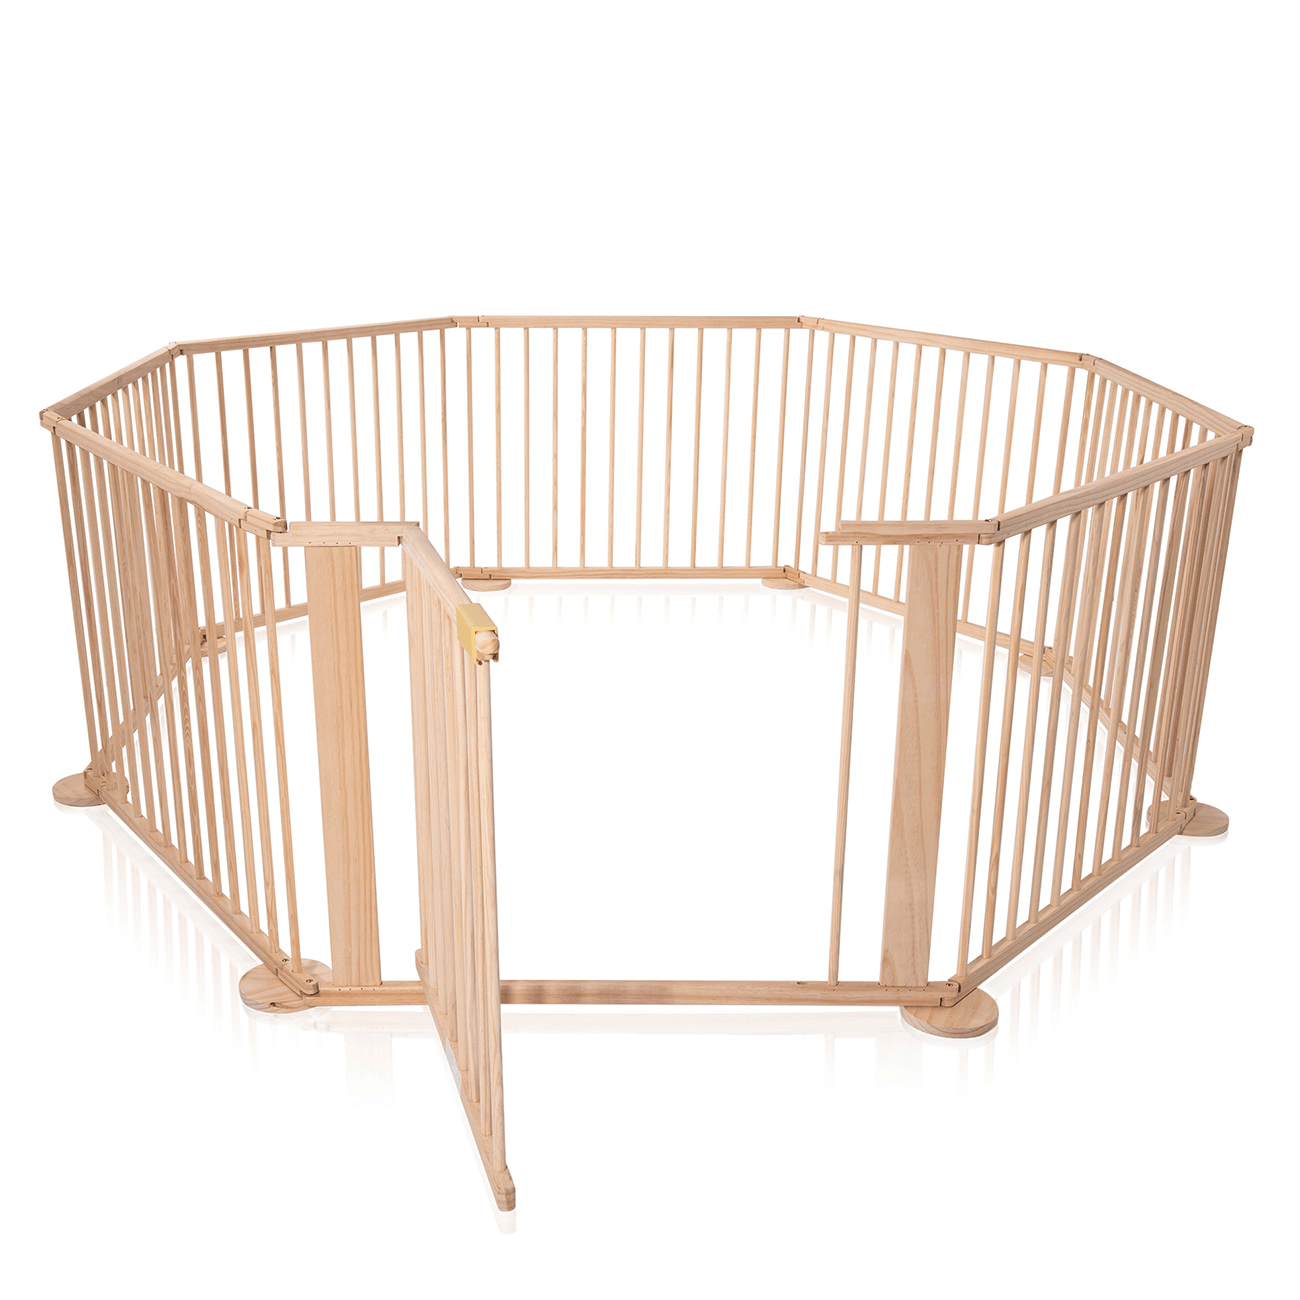 Baby Toddler Deluxe Kids Wooden Large Play Pen 8 Panel - The Shopsite